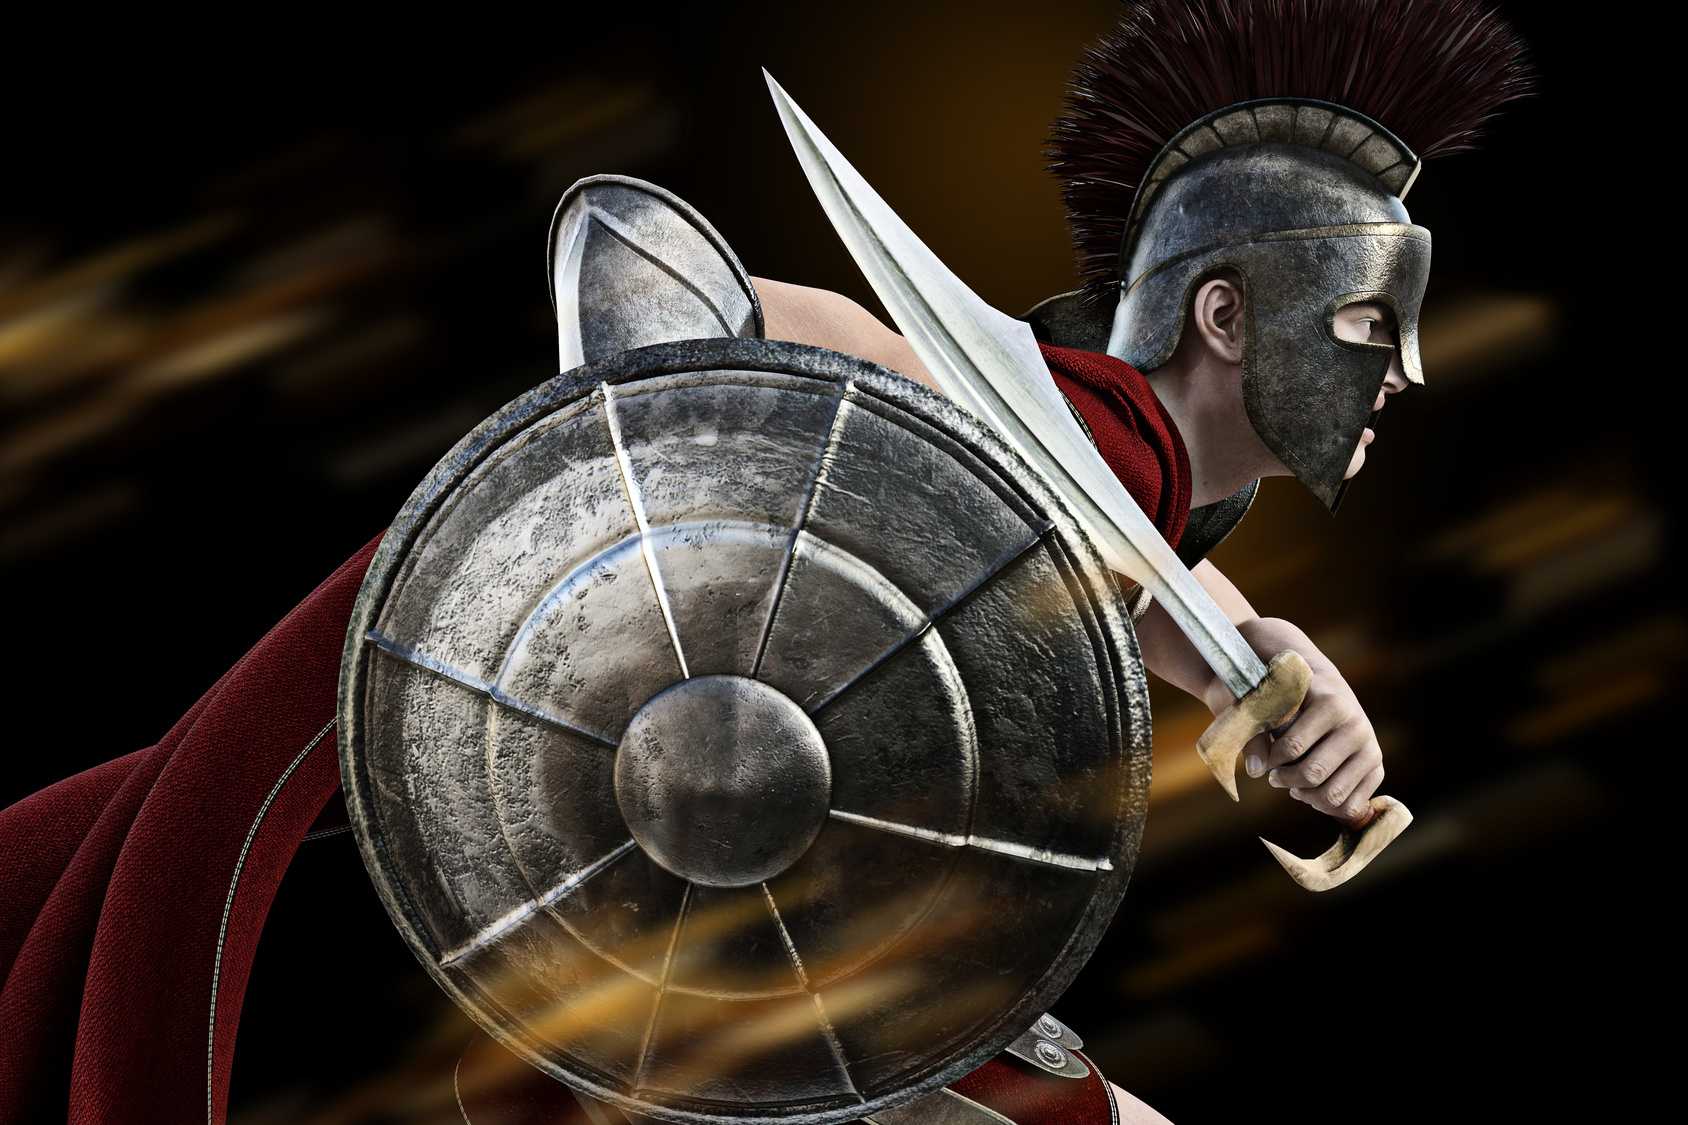 Spartan charge ,Spartan warrior in Battle dress attacking . Photo realistic 3d model scene.